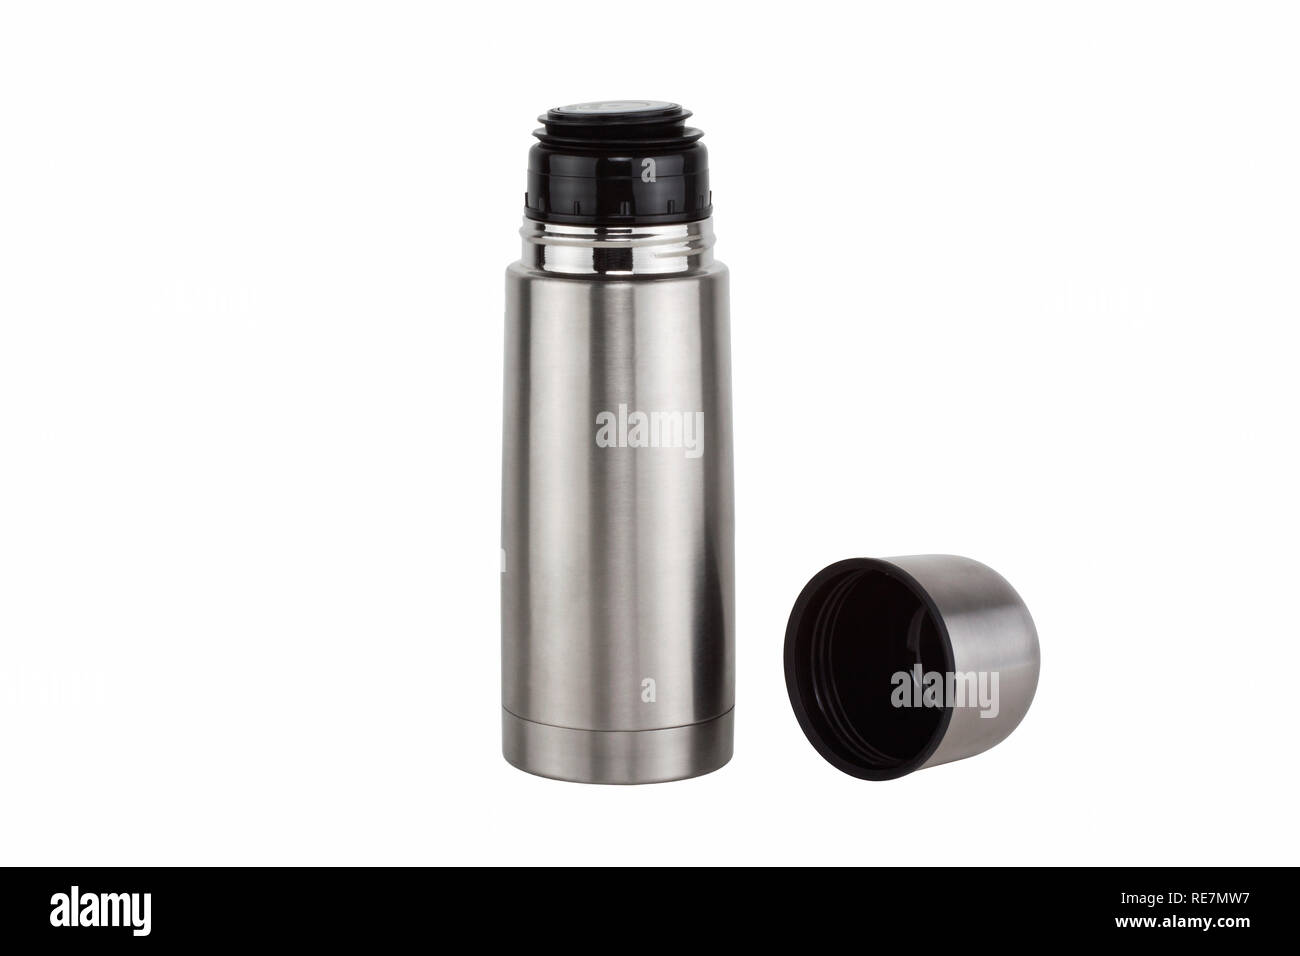 https://c8.alamy.com/comp/RE7MW7/stainless-bottle-thermos-travel-on-white-background-RE7MW7.jpg